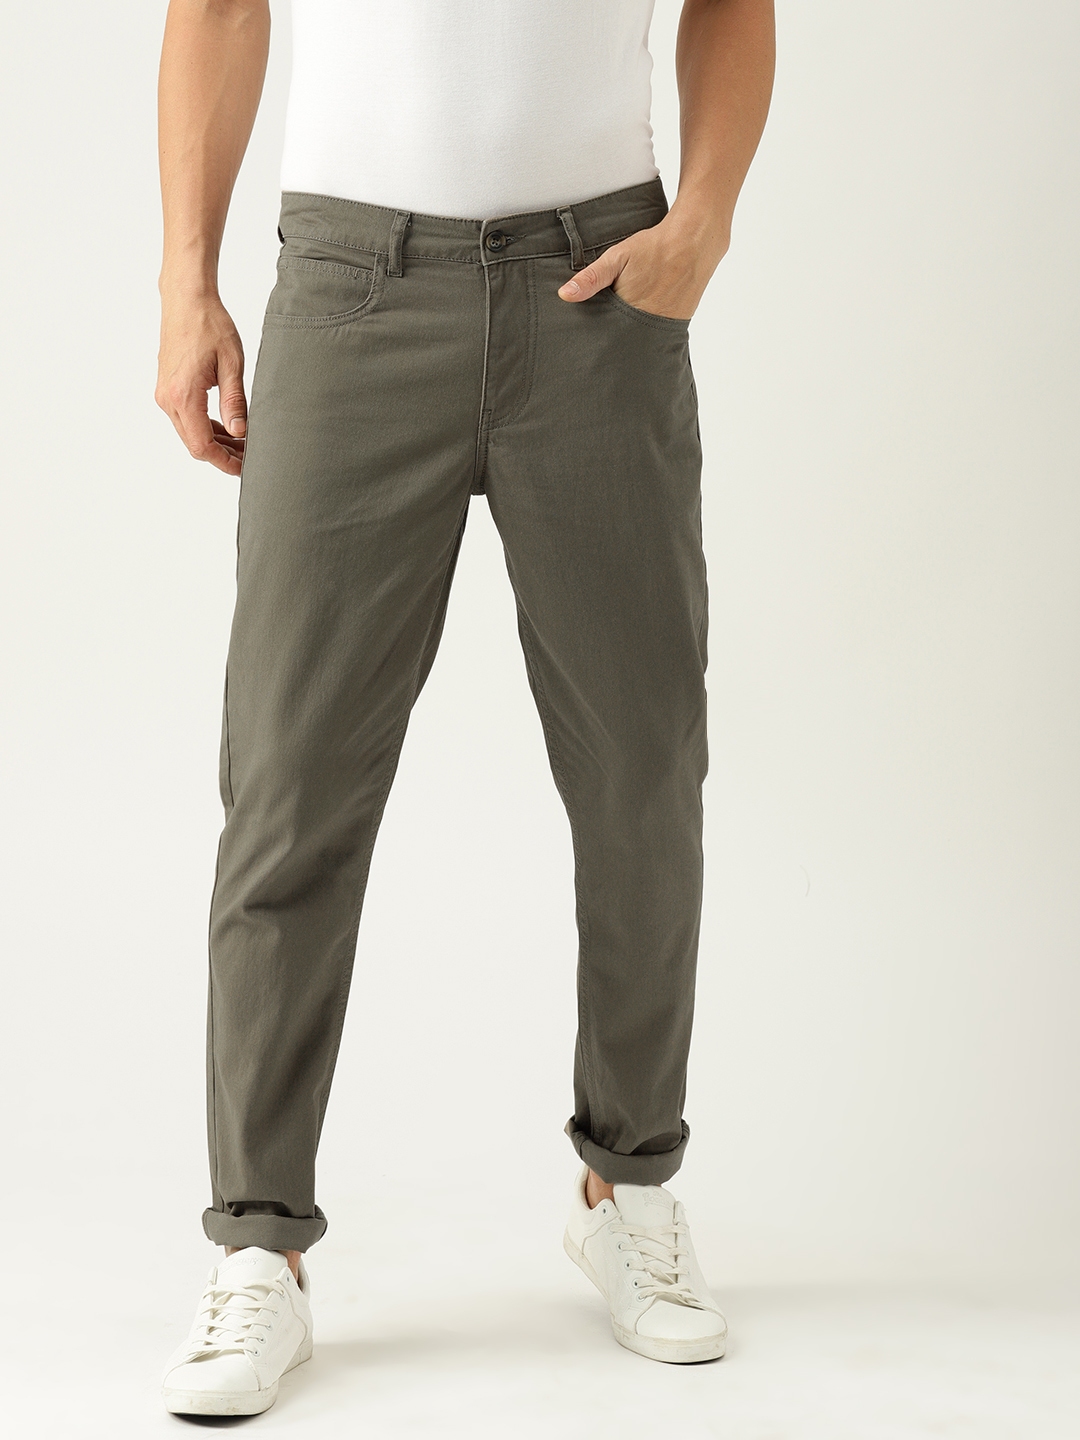 Buy United Colors Of Benetton Men Grey Slim Fit Solid Chinos - Trousers ...